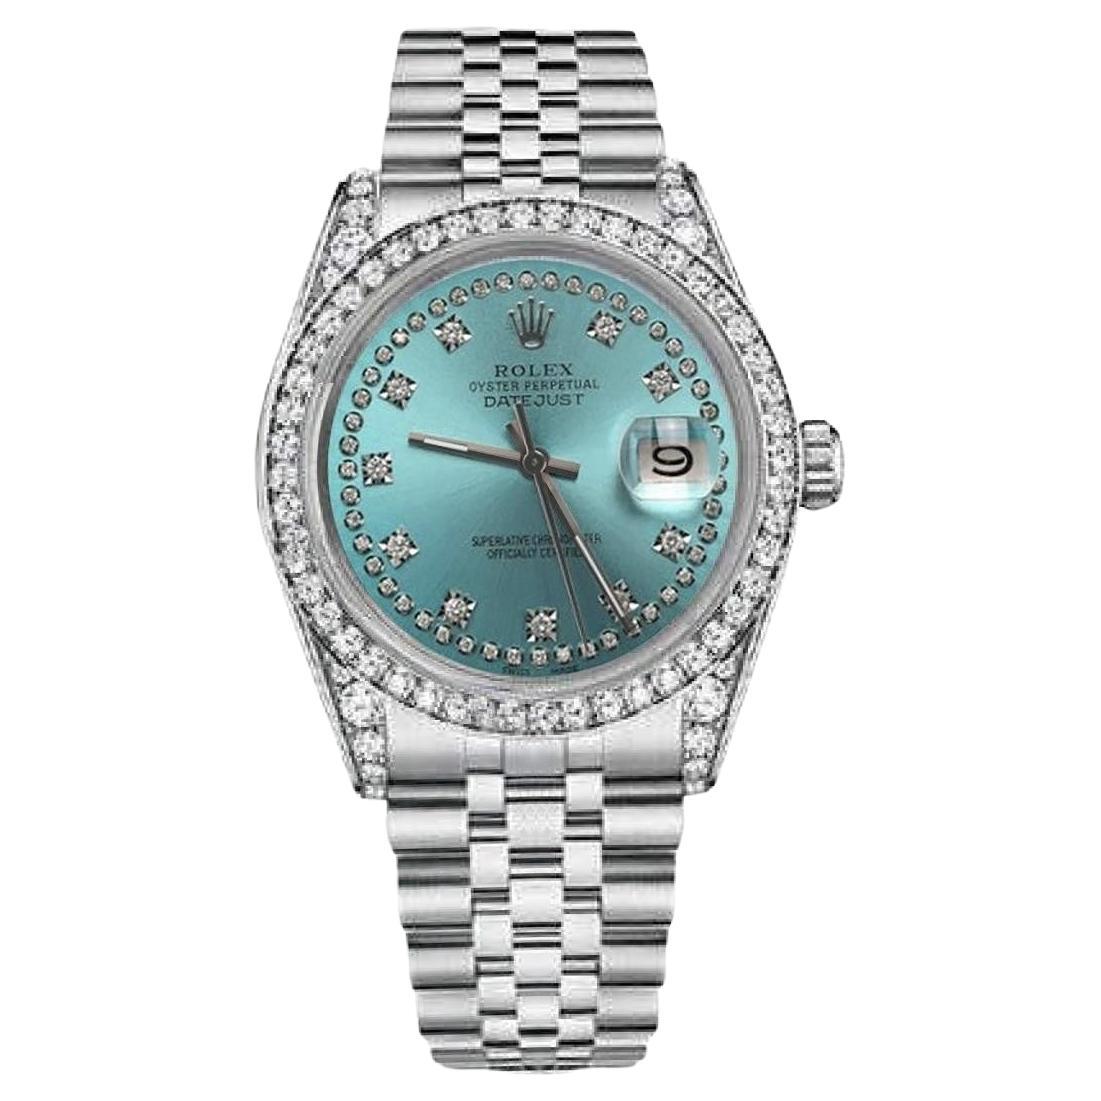 Rolex Datejust Ice Blue Two Row Diamond Face Excellent Pre-Owned Watch